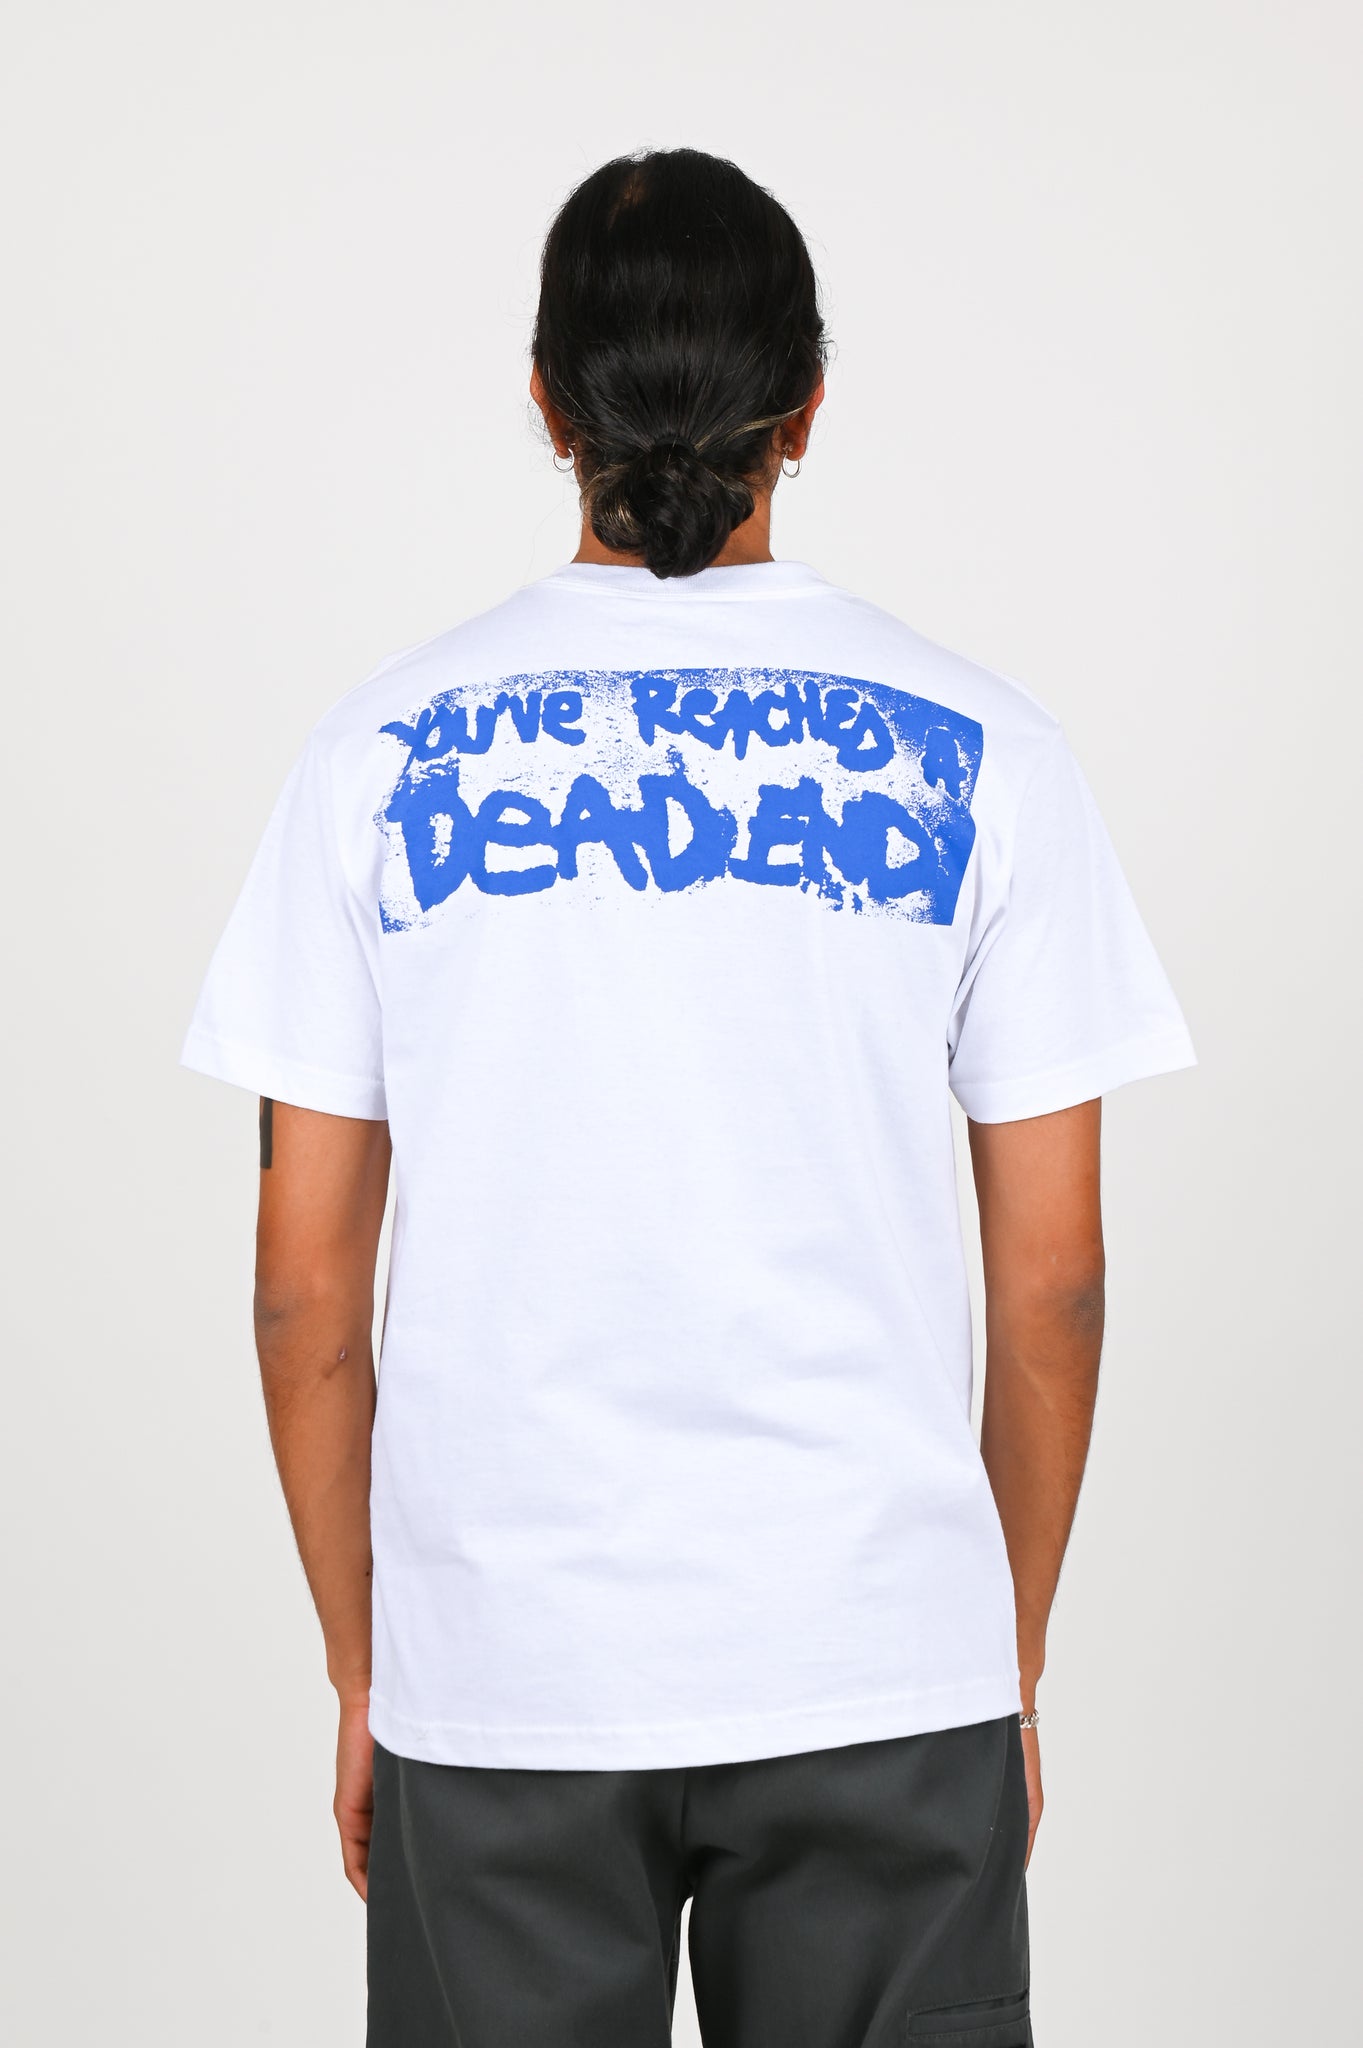 Jack Irvine 'Dead End Yobs' T-Shirt (Second Edition)